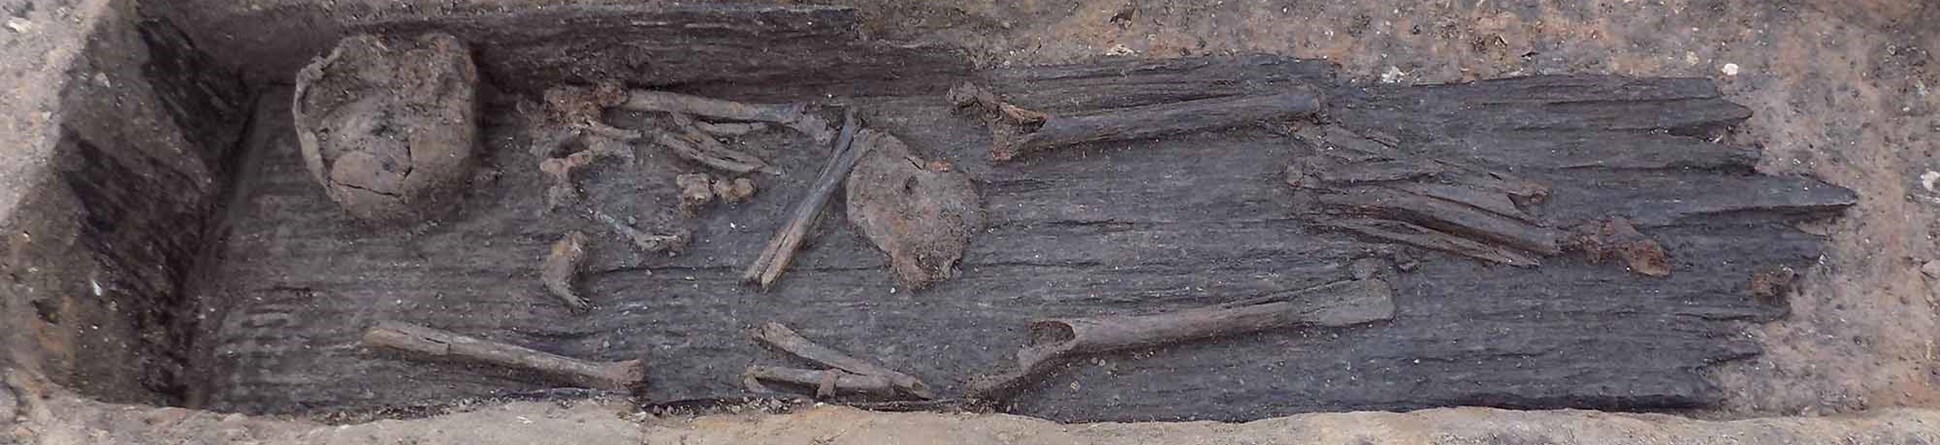 A plank lined grave with human remains